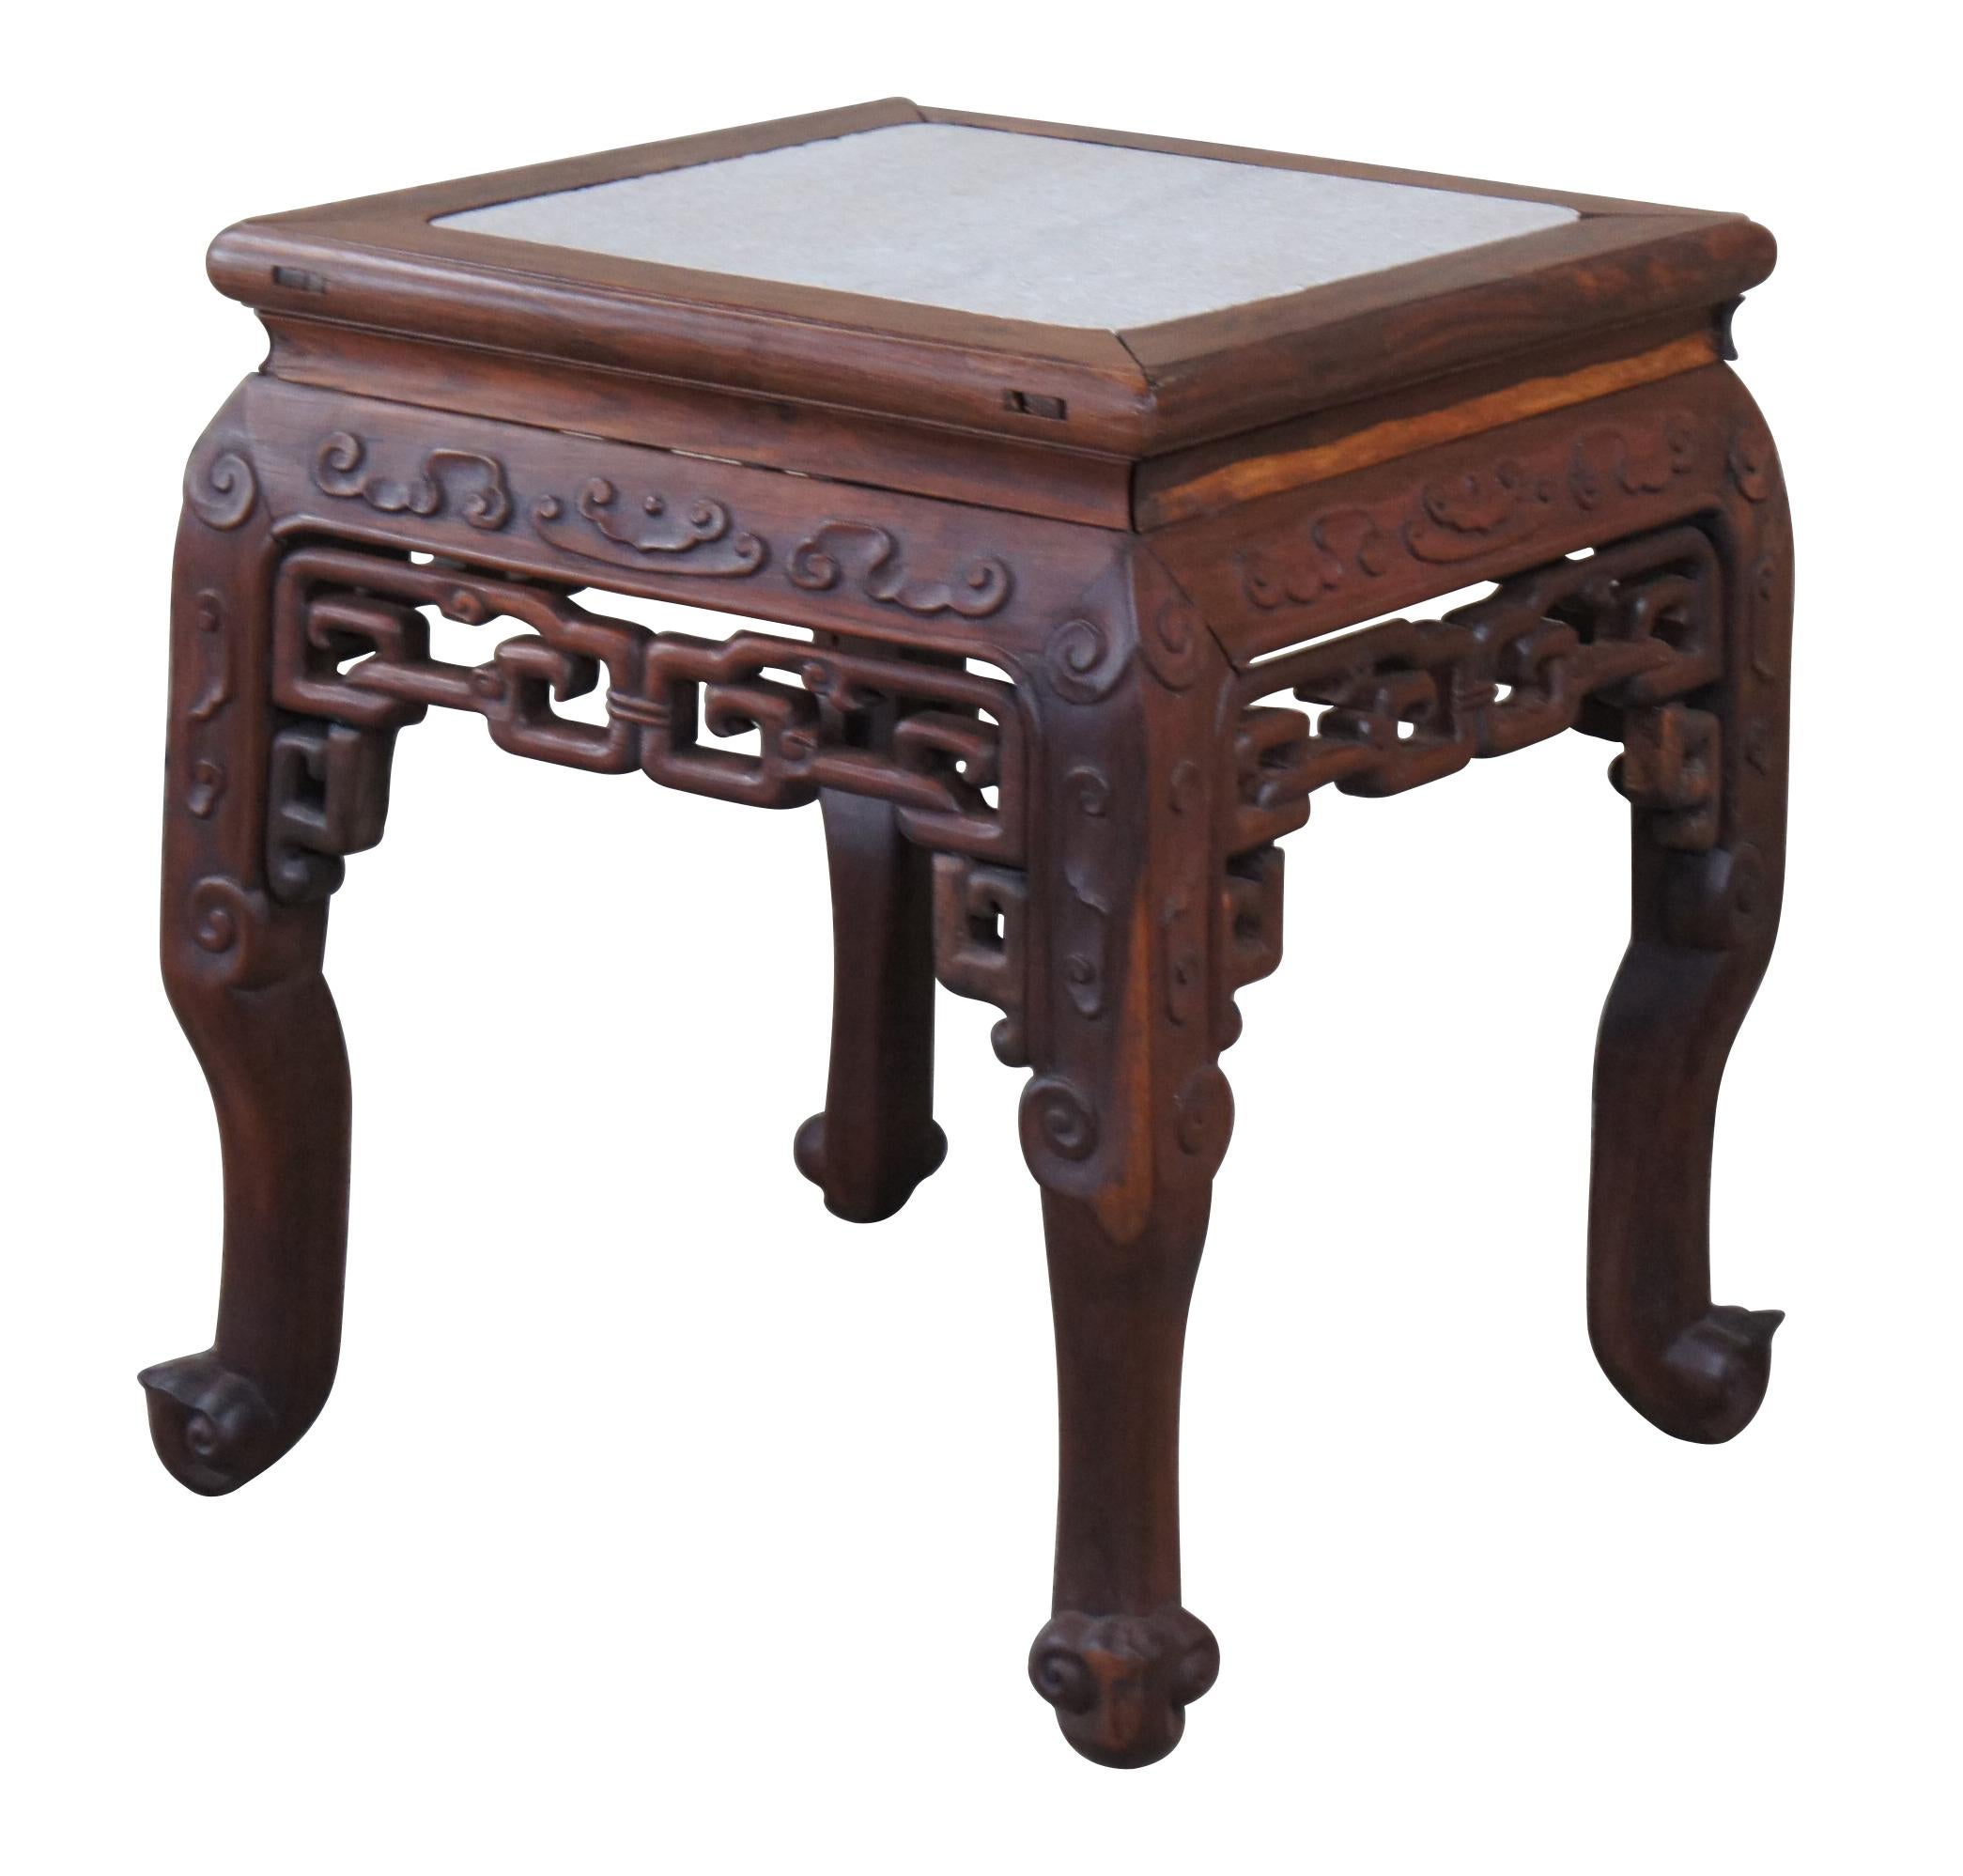 Chinoiserie Antique Chinese Rosewood Carved Marble Top Side Table Stool Plant Stand Pedestal For Sale